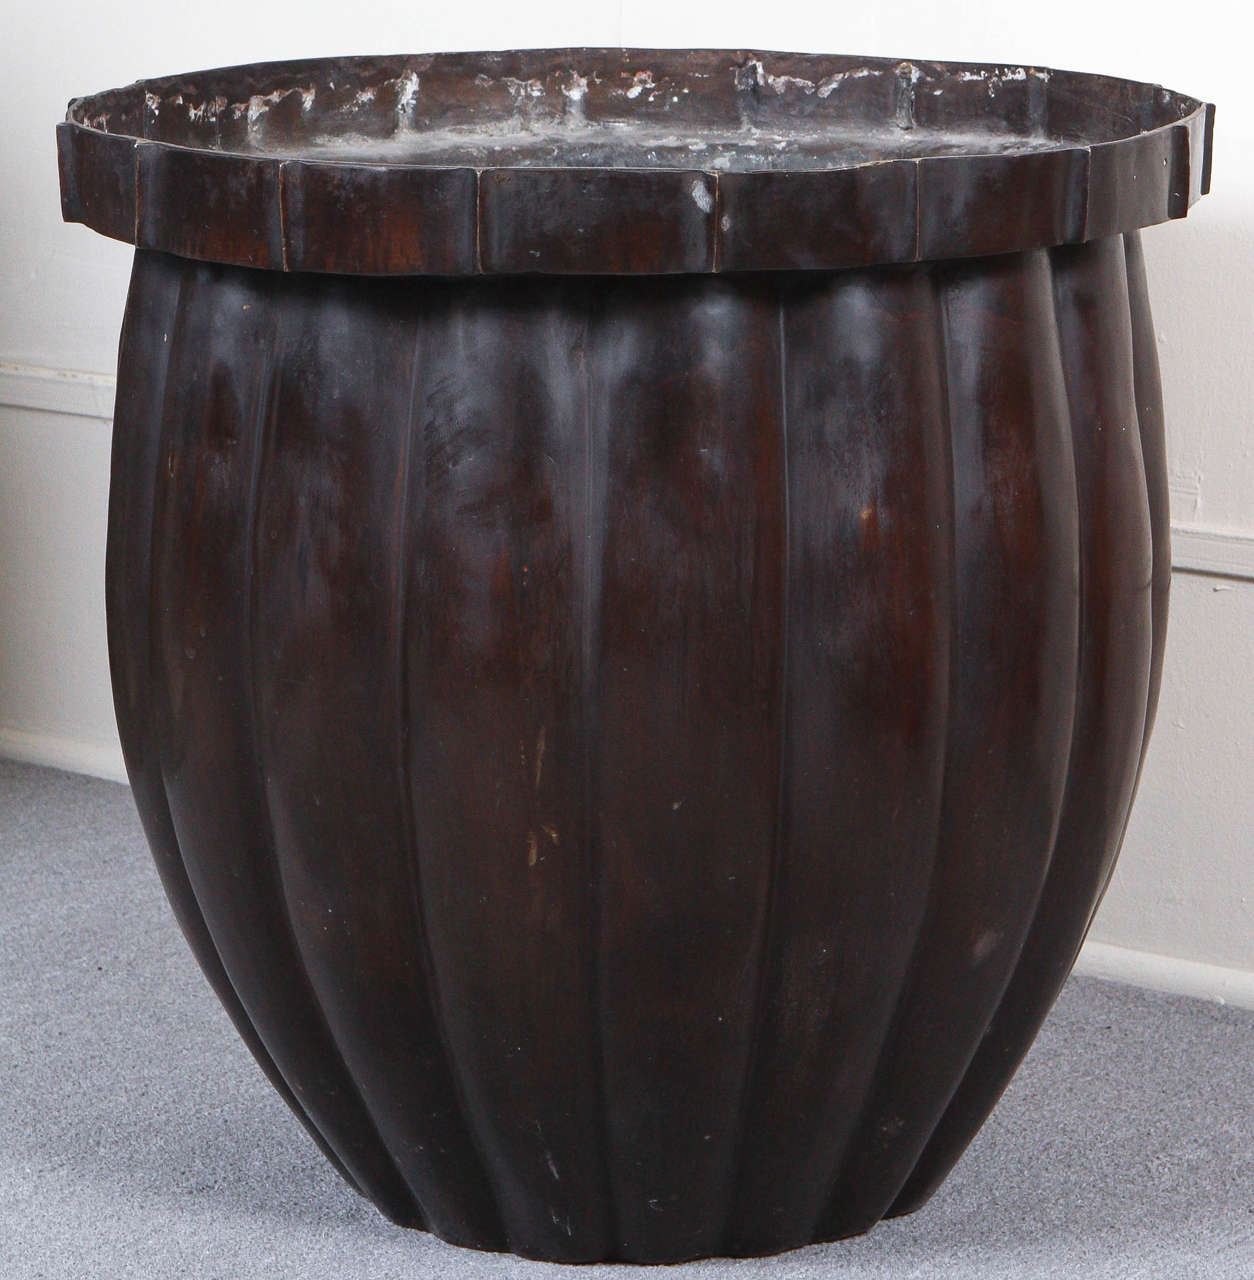 Pair of very large cast bronze colored planters.
This pair of exceptional planters are a dark bronze color with very little weathering or patina and minimal scratches.
These are a modern version of an antique bronze Chinese design.